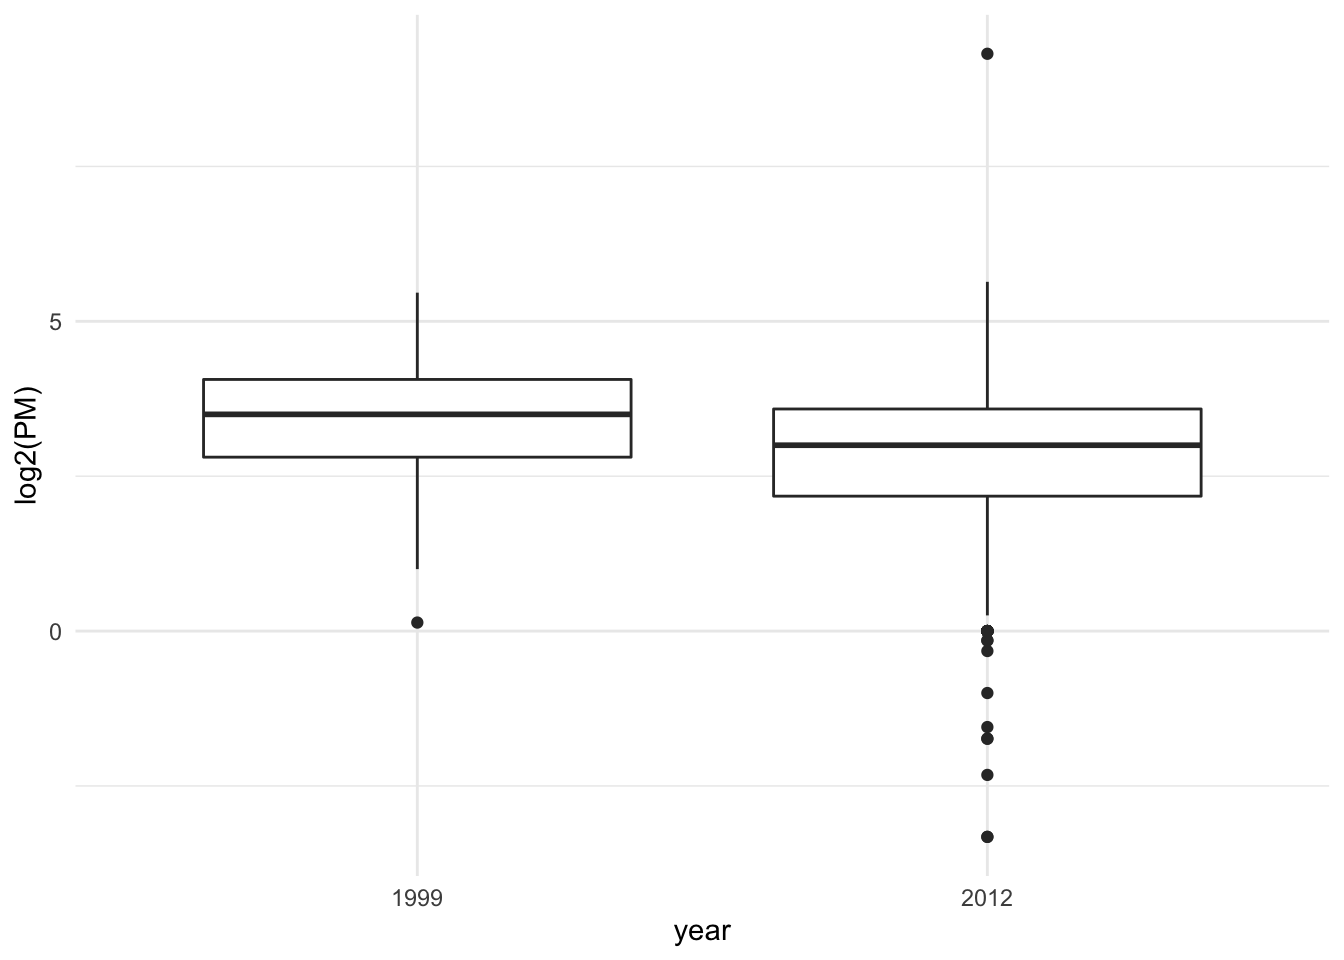 Boxplot of PM values in 1999 and 2012